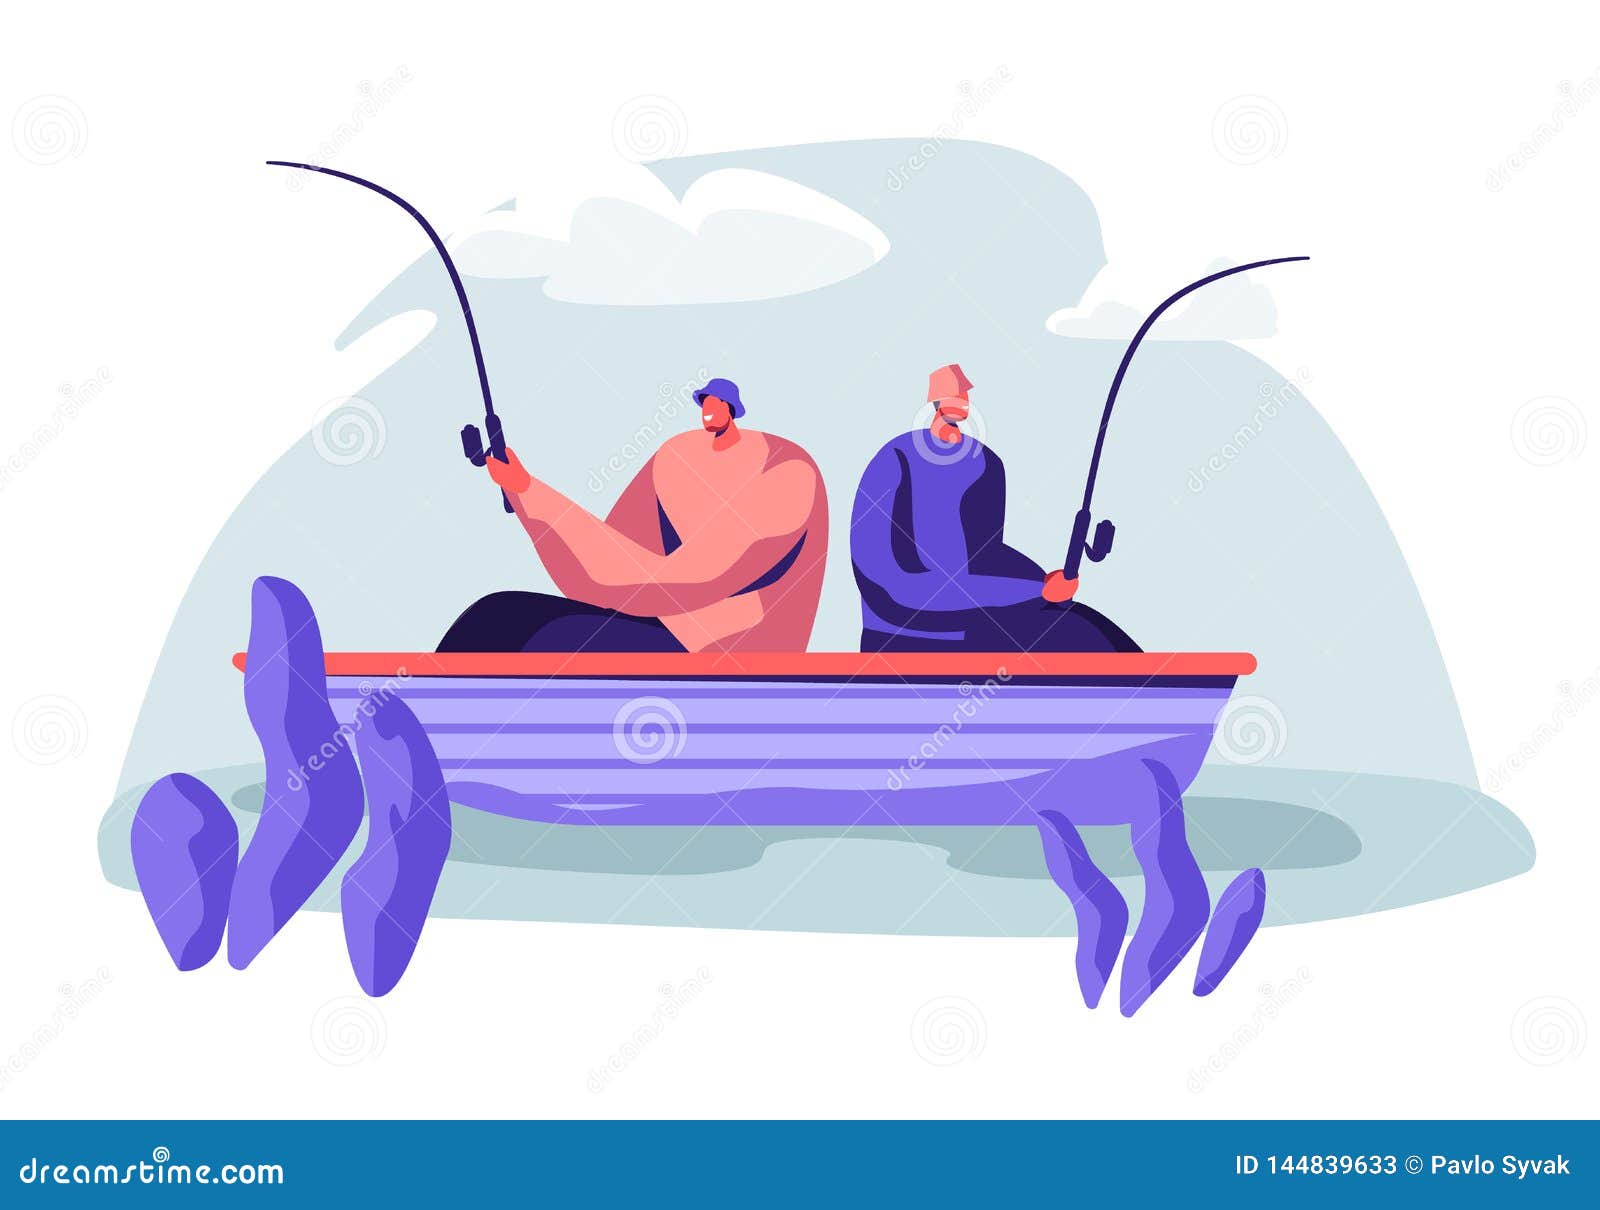 Men Fishing in Boat on Calm Lake or River at Summer Day. Relaxing Hobby at  Summertime Stock Vector - Illustration of character, recreation: 144839633